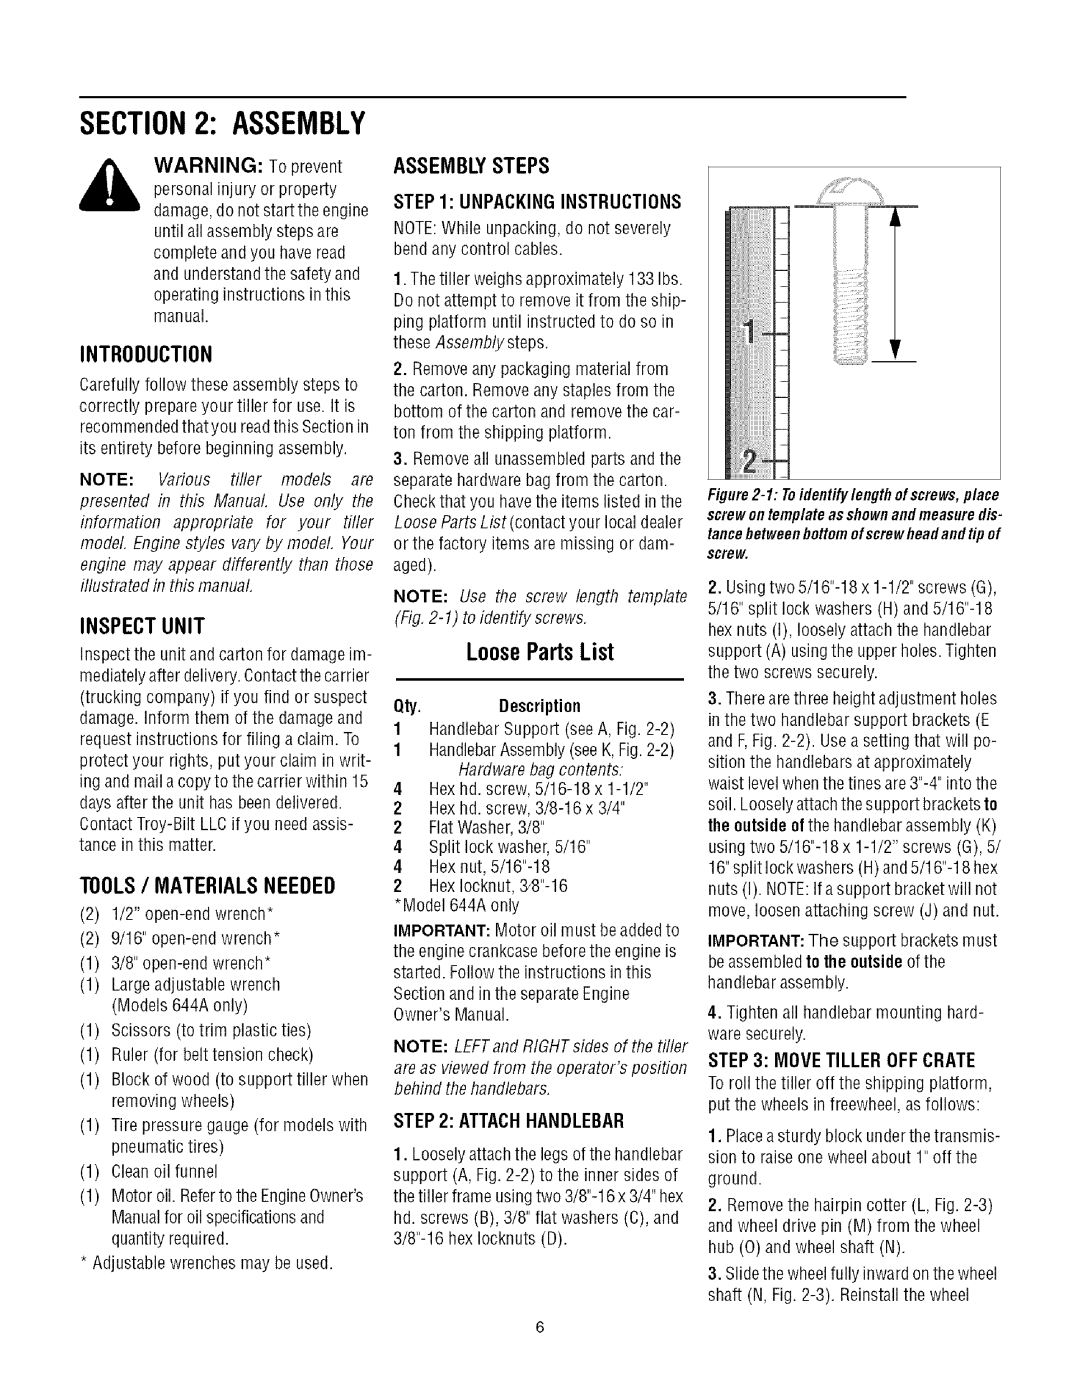 Troy-Bilt 644A LooseParts List, Inspectunit, Tools/ Materialsneeded, Assemblysteps, WARNING To prevent, Introduction 